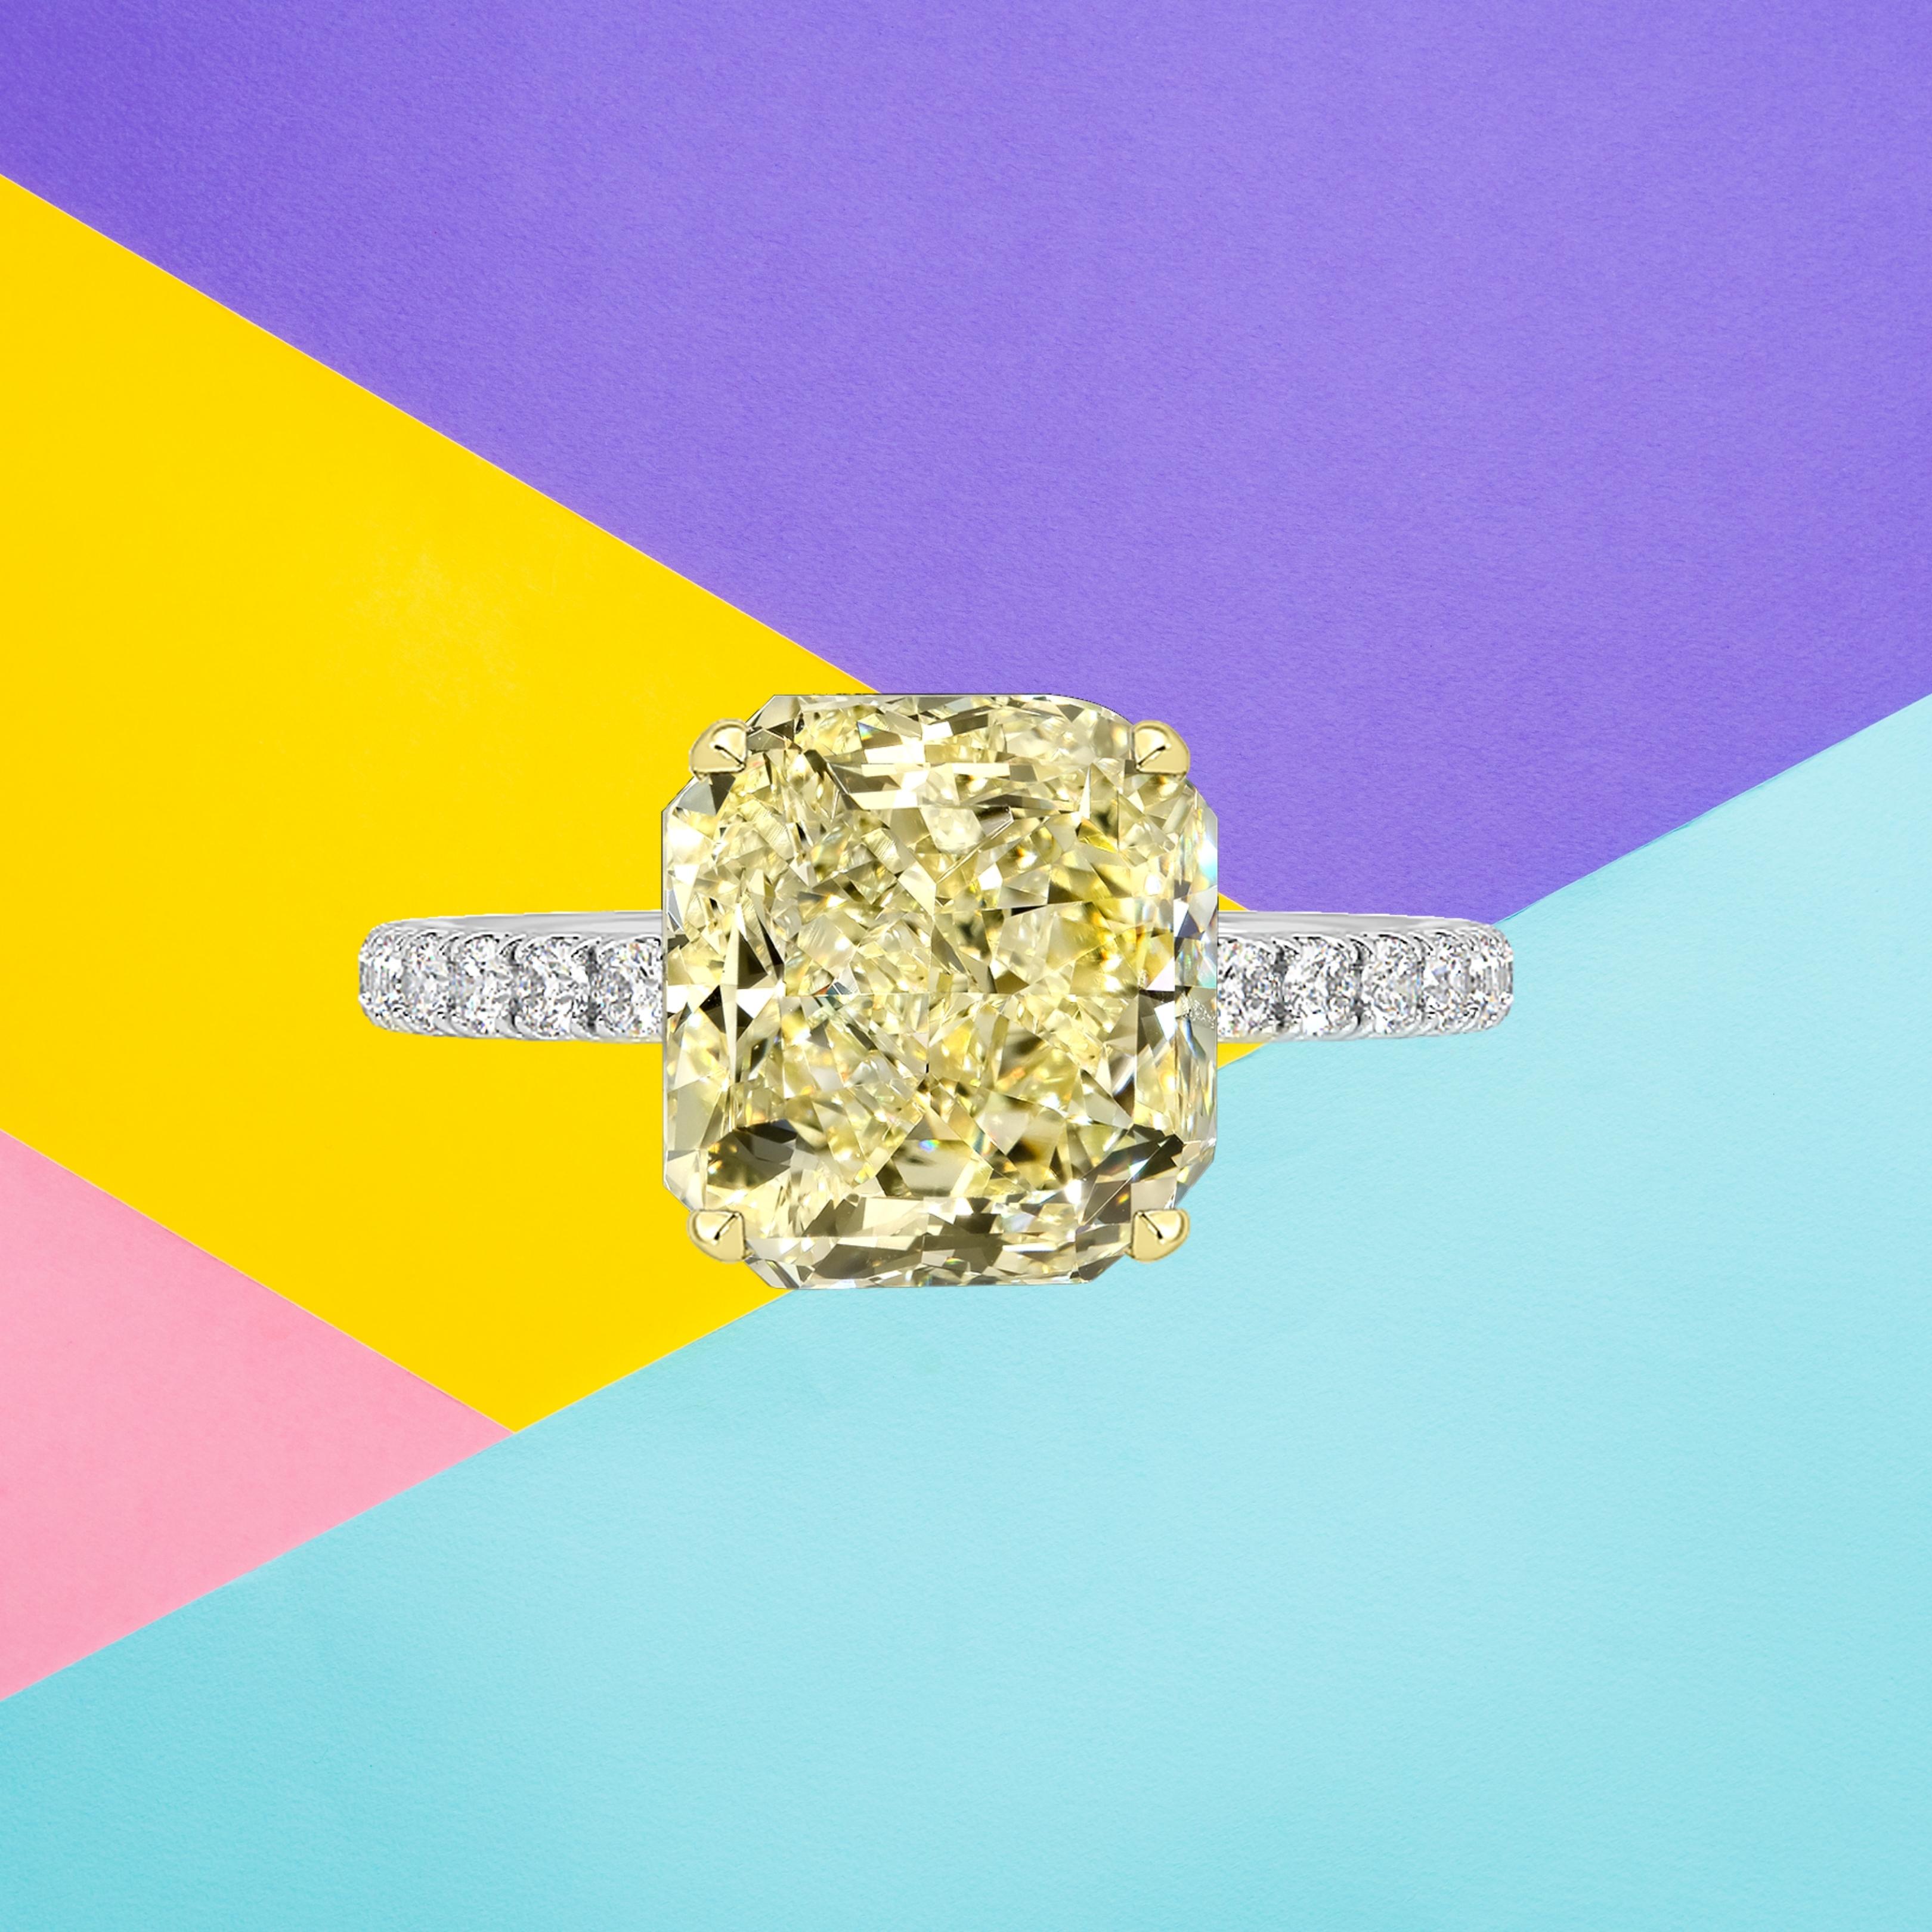 This radiant cut diamond weighs 3.01 carat and is certified 'Fancy Light Yellow' color by the Gemmological Institute of America. The GIA has also assigned a VS1 clarity grading to the stone. The diamond has been inscribed with the certificate number